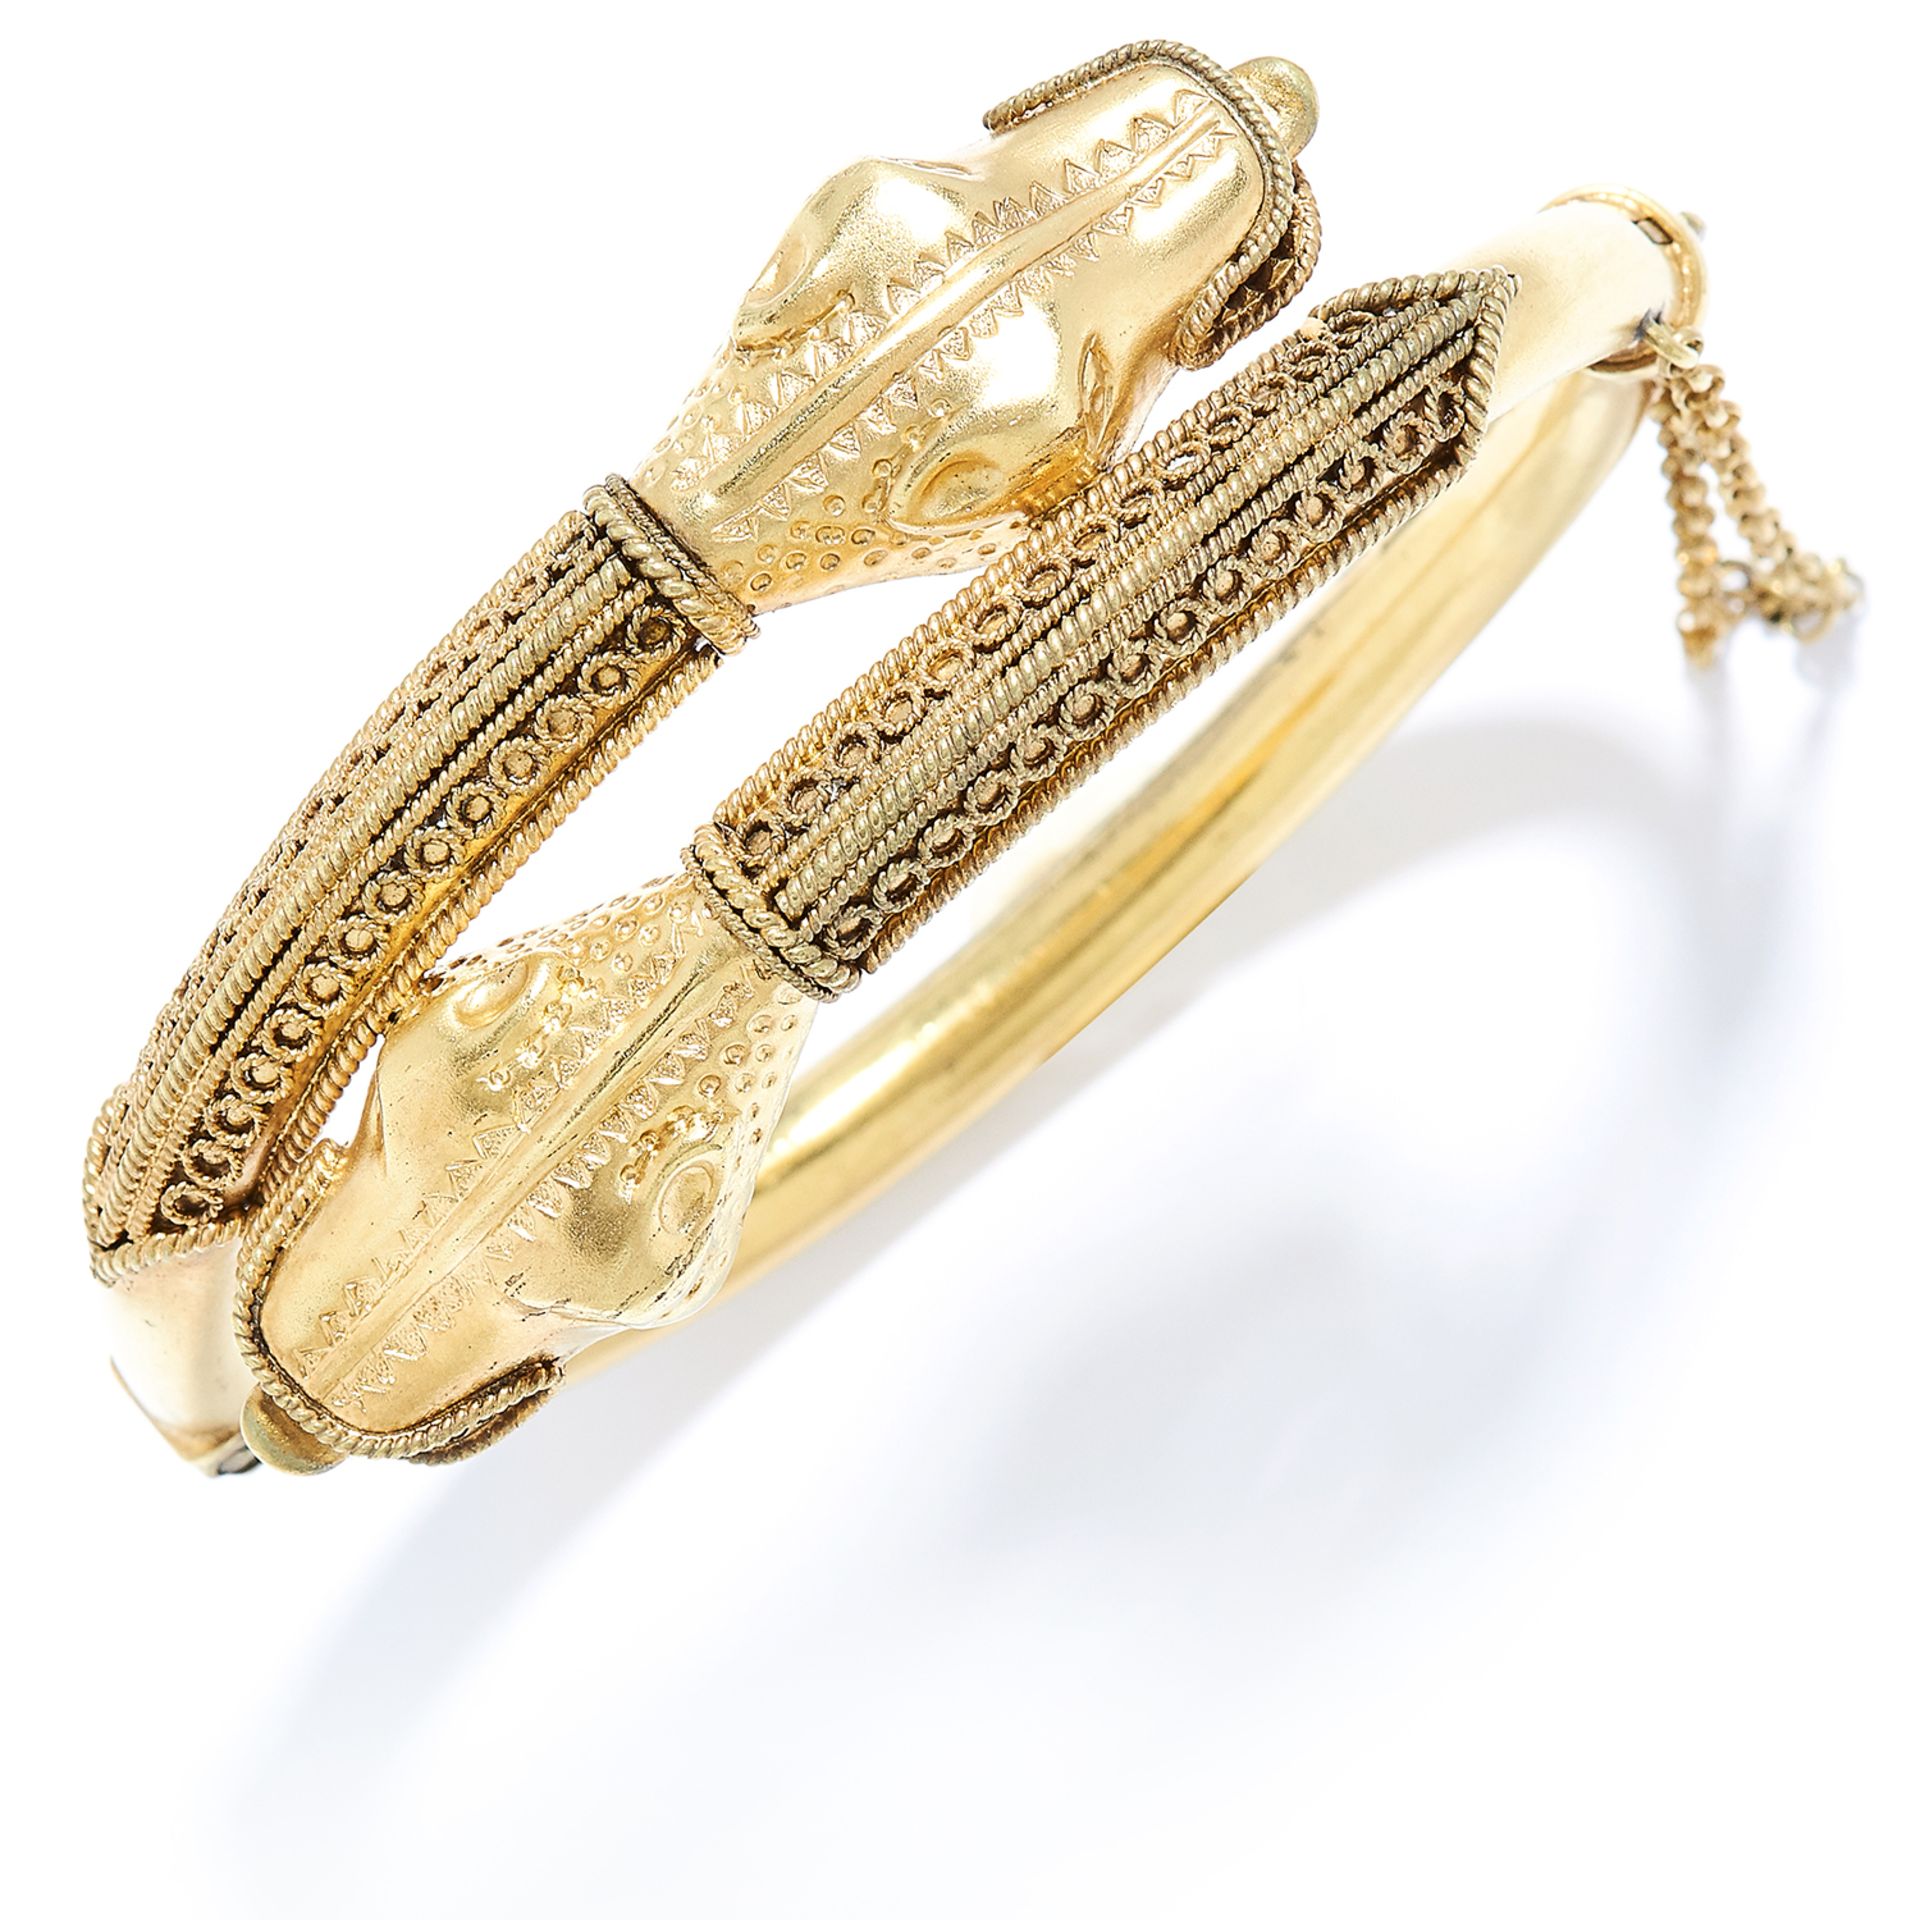 ANTIQUE GOLD SNAKE / DRAGON BANGLE in high carat yellow gold, depicting two dragon heads coiling